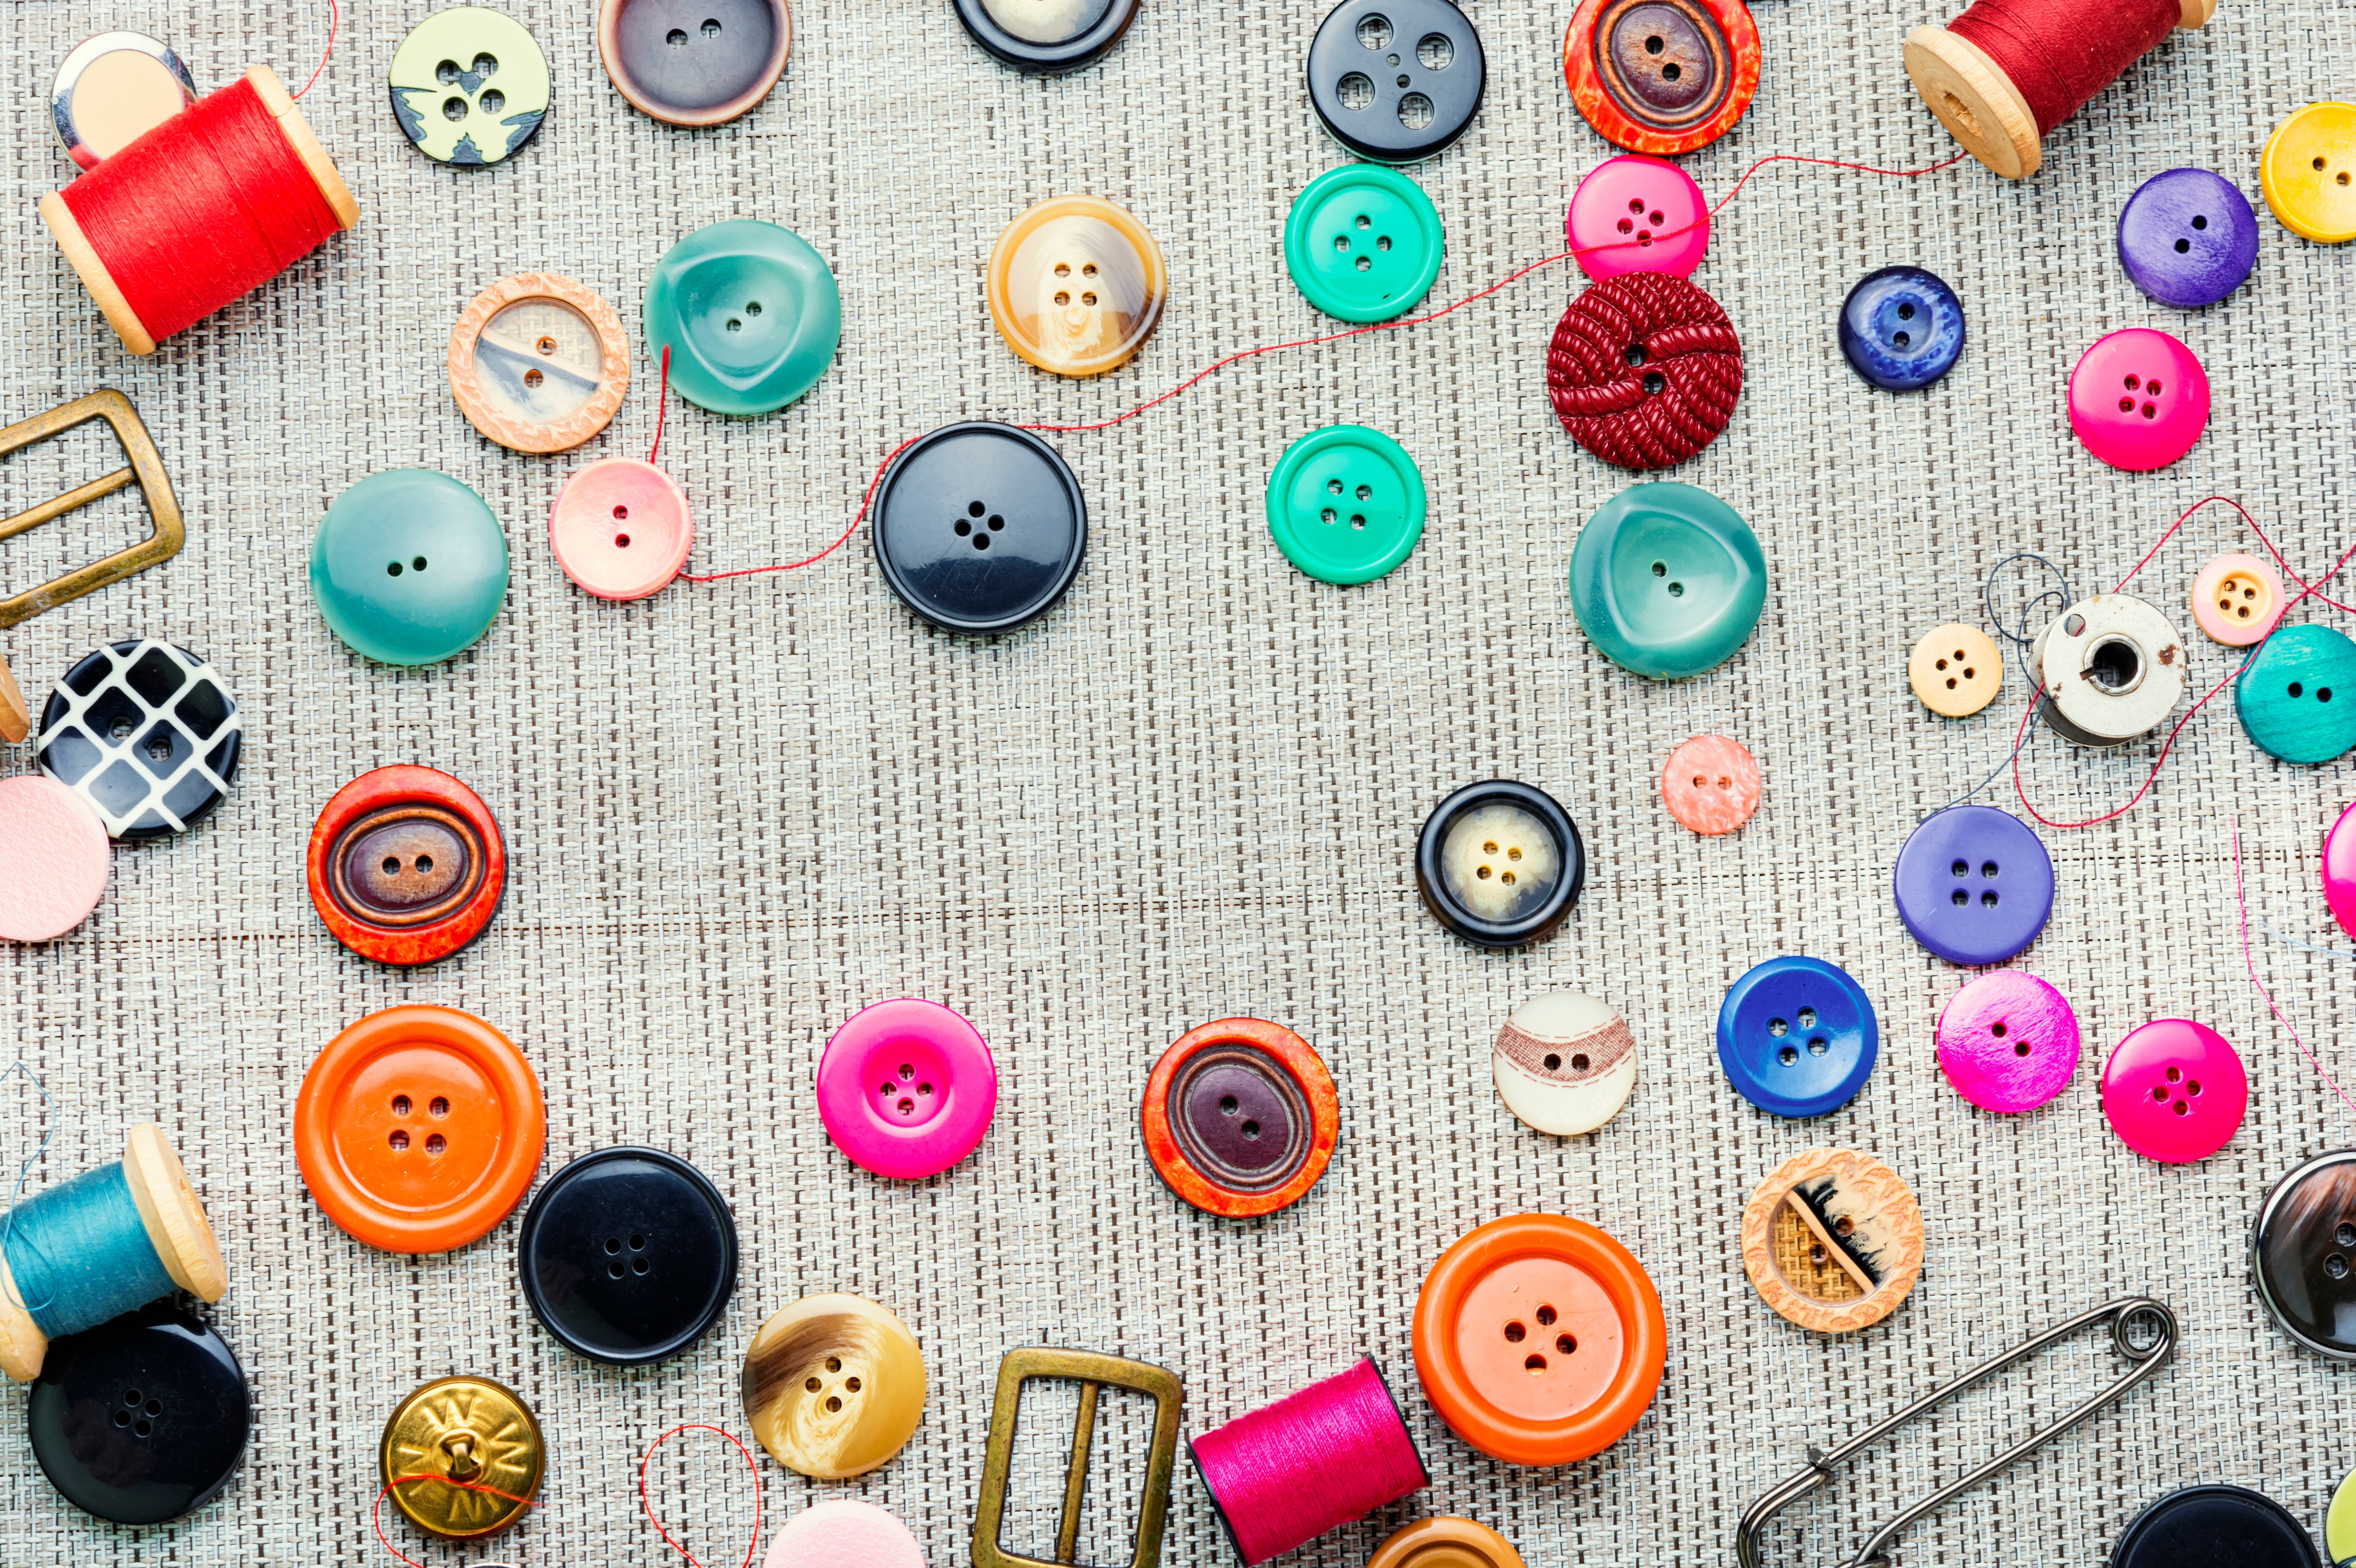 Flat Back Pearls - Bright Colors Craft Buttons & Embellishments